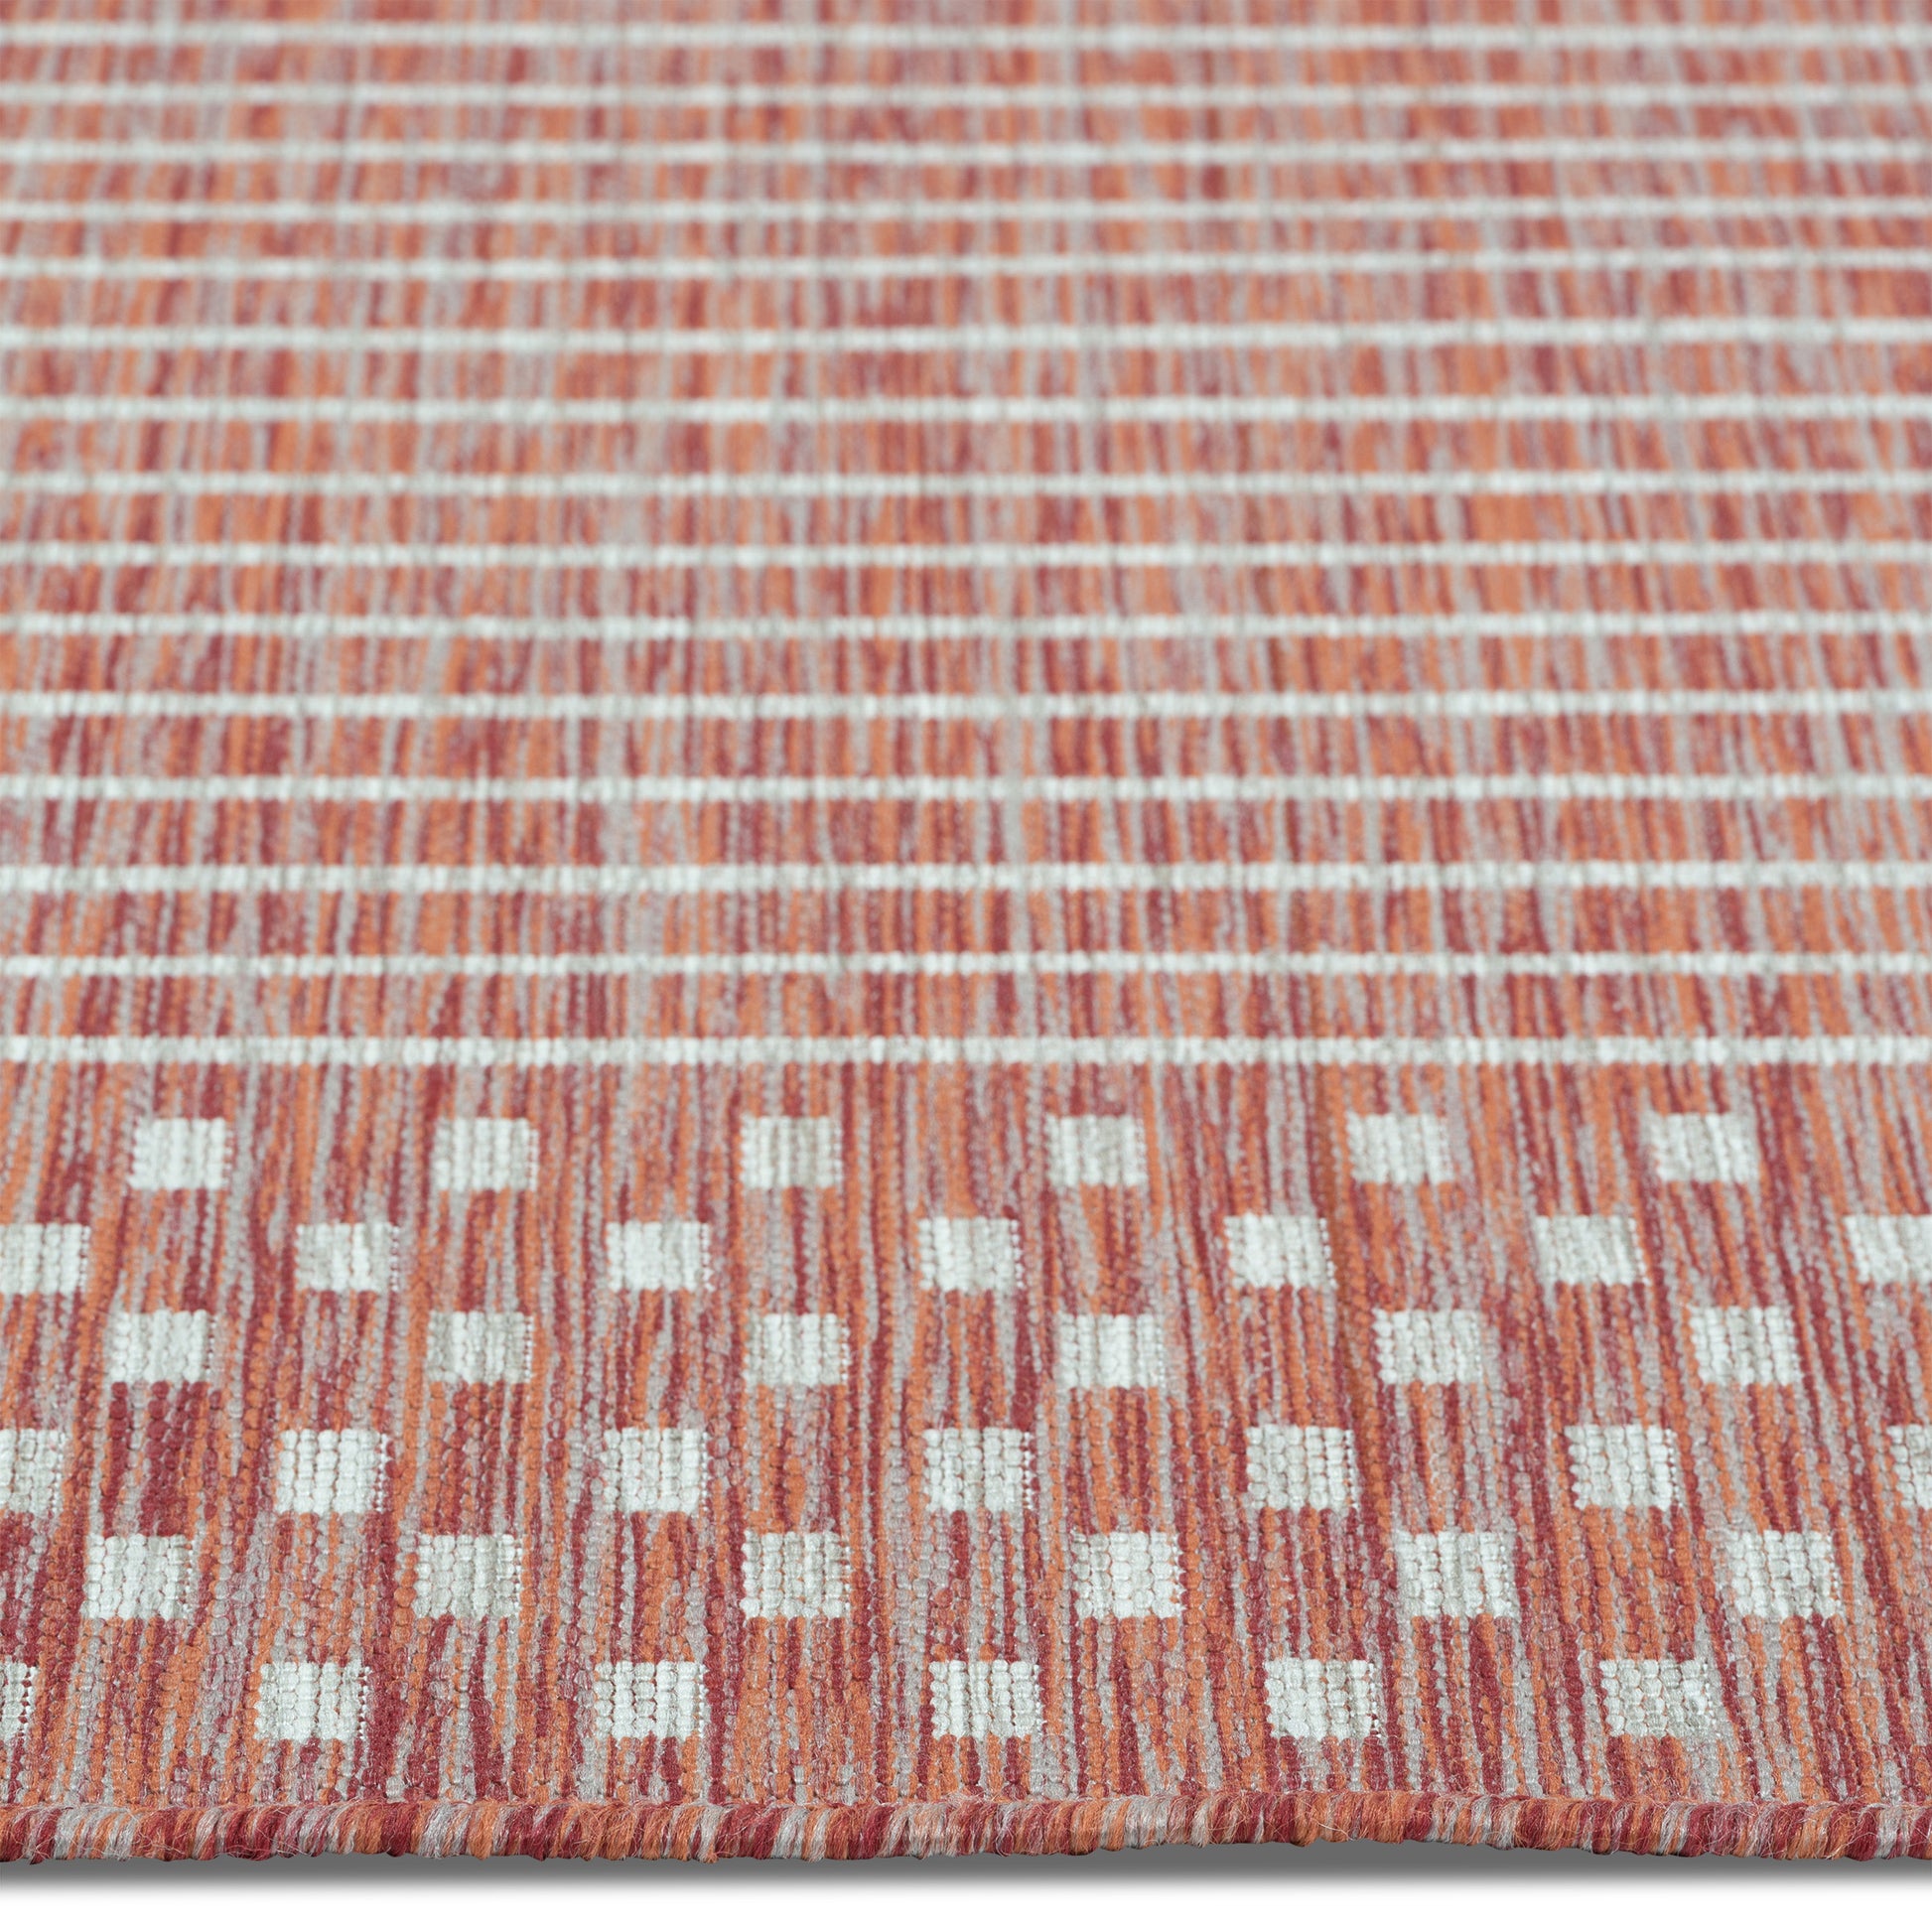 Easy Rugs Belize Modern Red Copper Weiss Geometric Patio Outdoor Rug